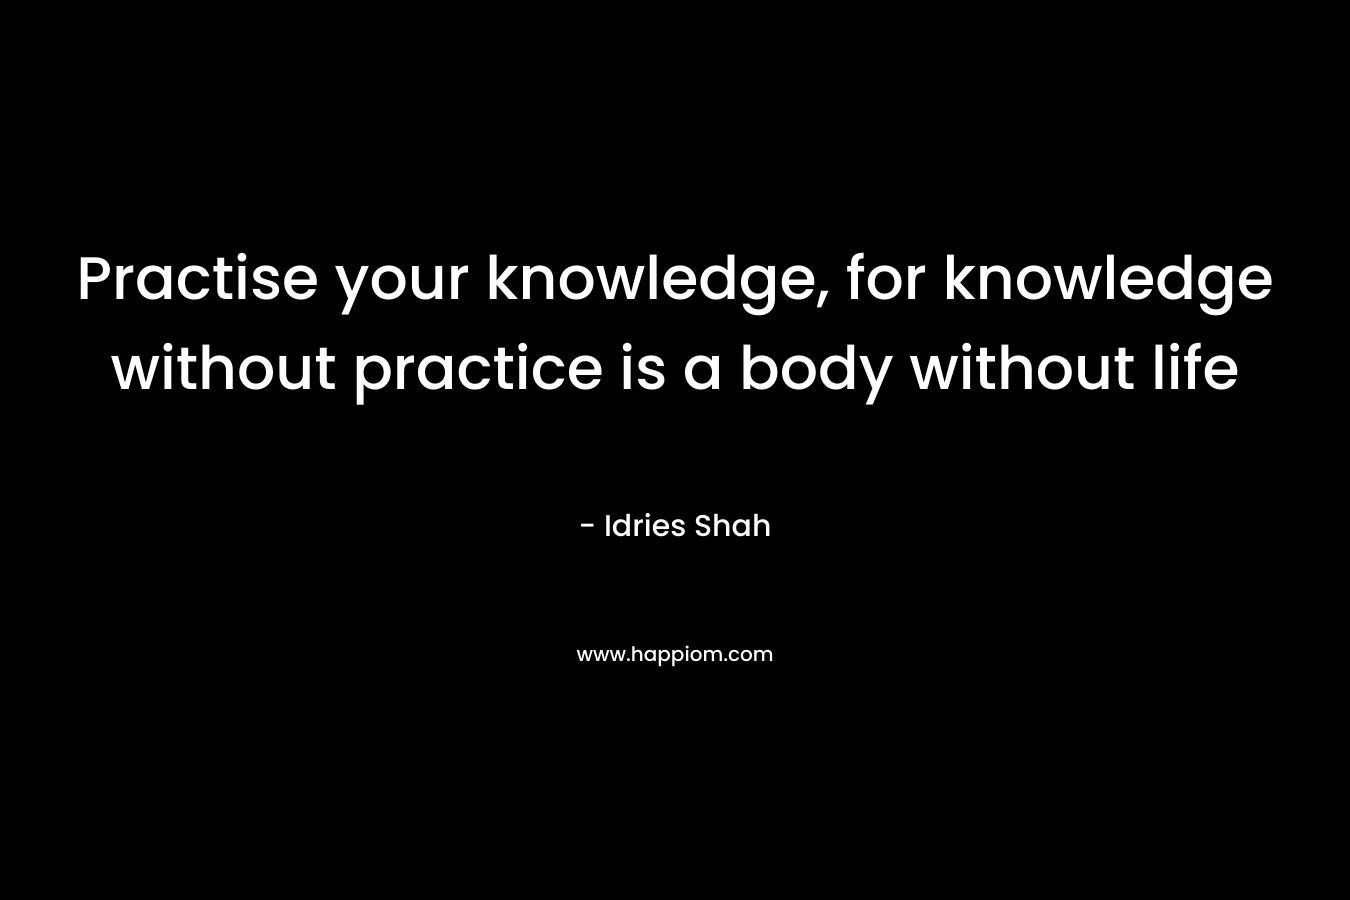 Practise your knowledge, for knowledge without practice is a body without life – Idries Shah